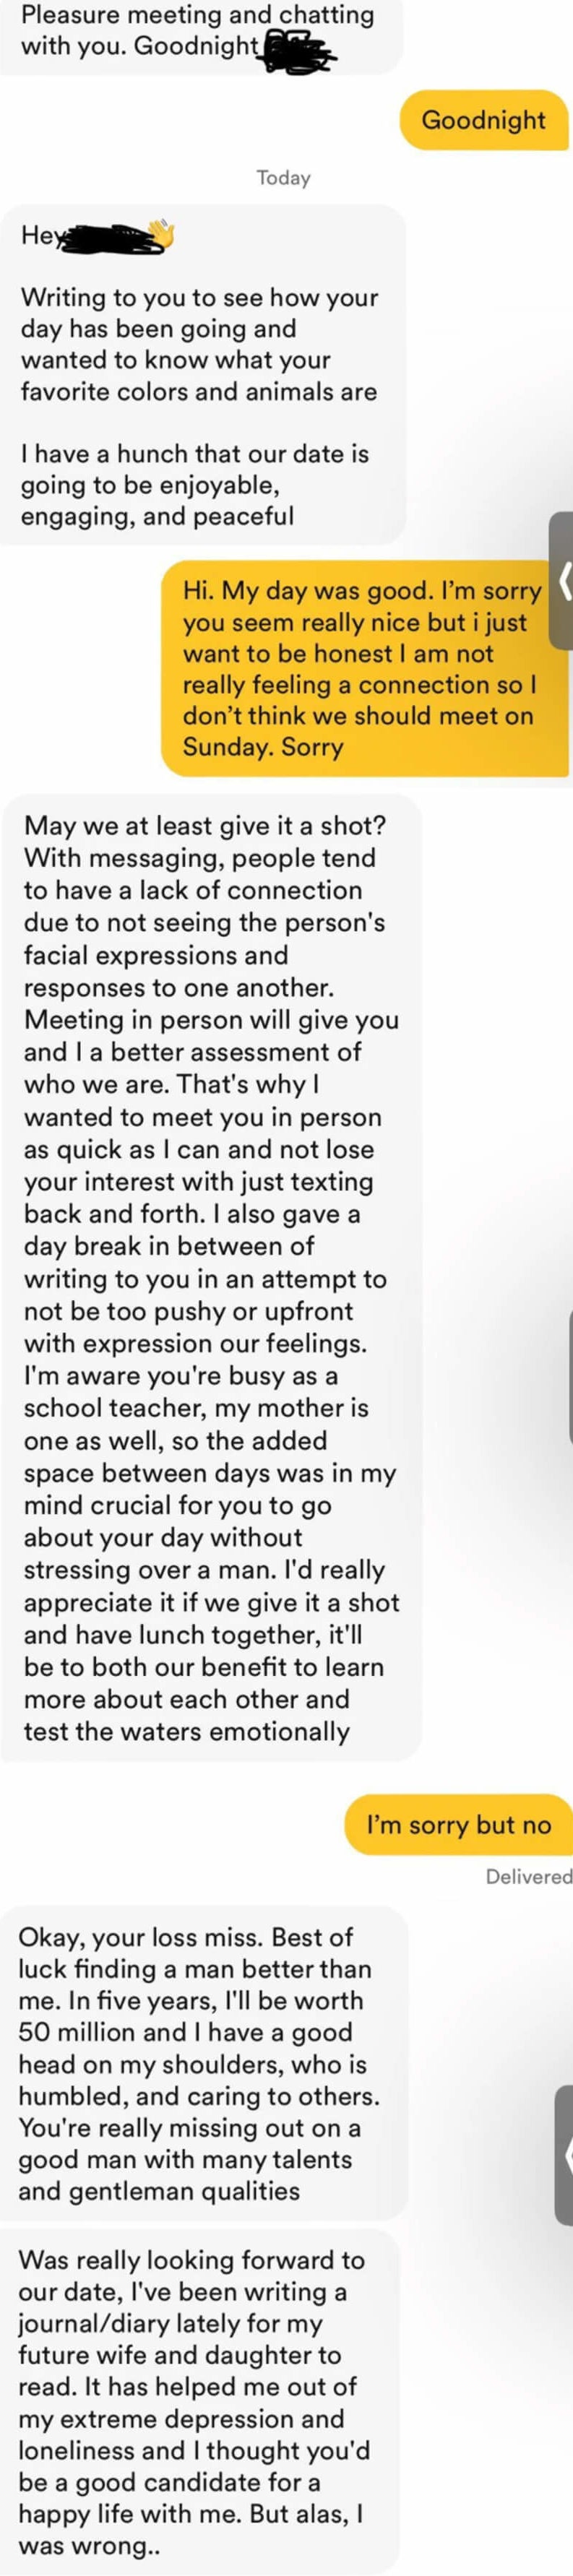 girl says she wants to cancel the second date and guy asks her to meet in person one more time to test chemistry. she says no again and he says it&#x27;s her loss because he&#x27;ll be rich soon and she&#x27;s missing out on a happy life with him